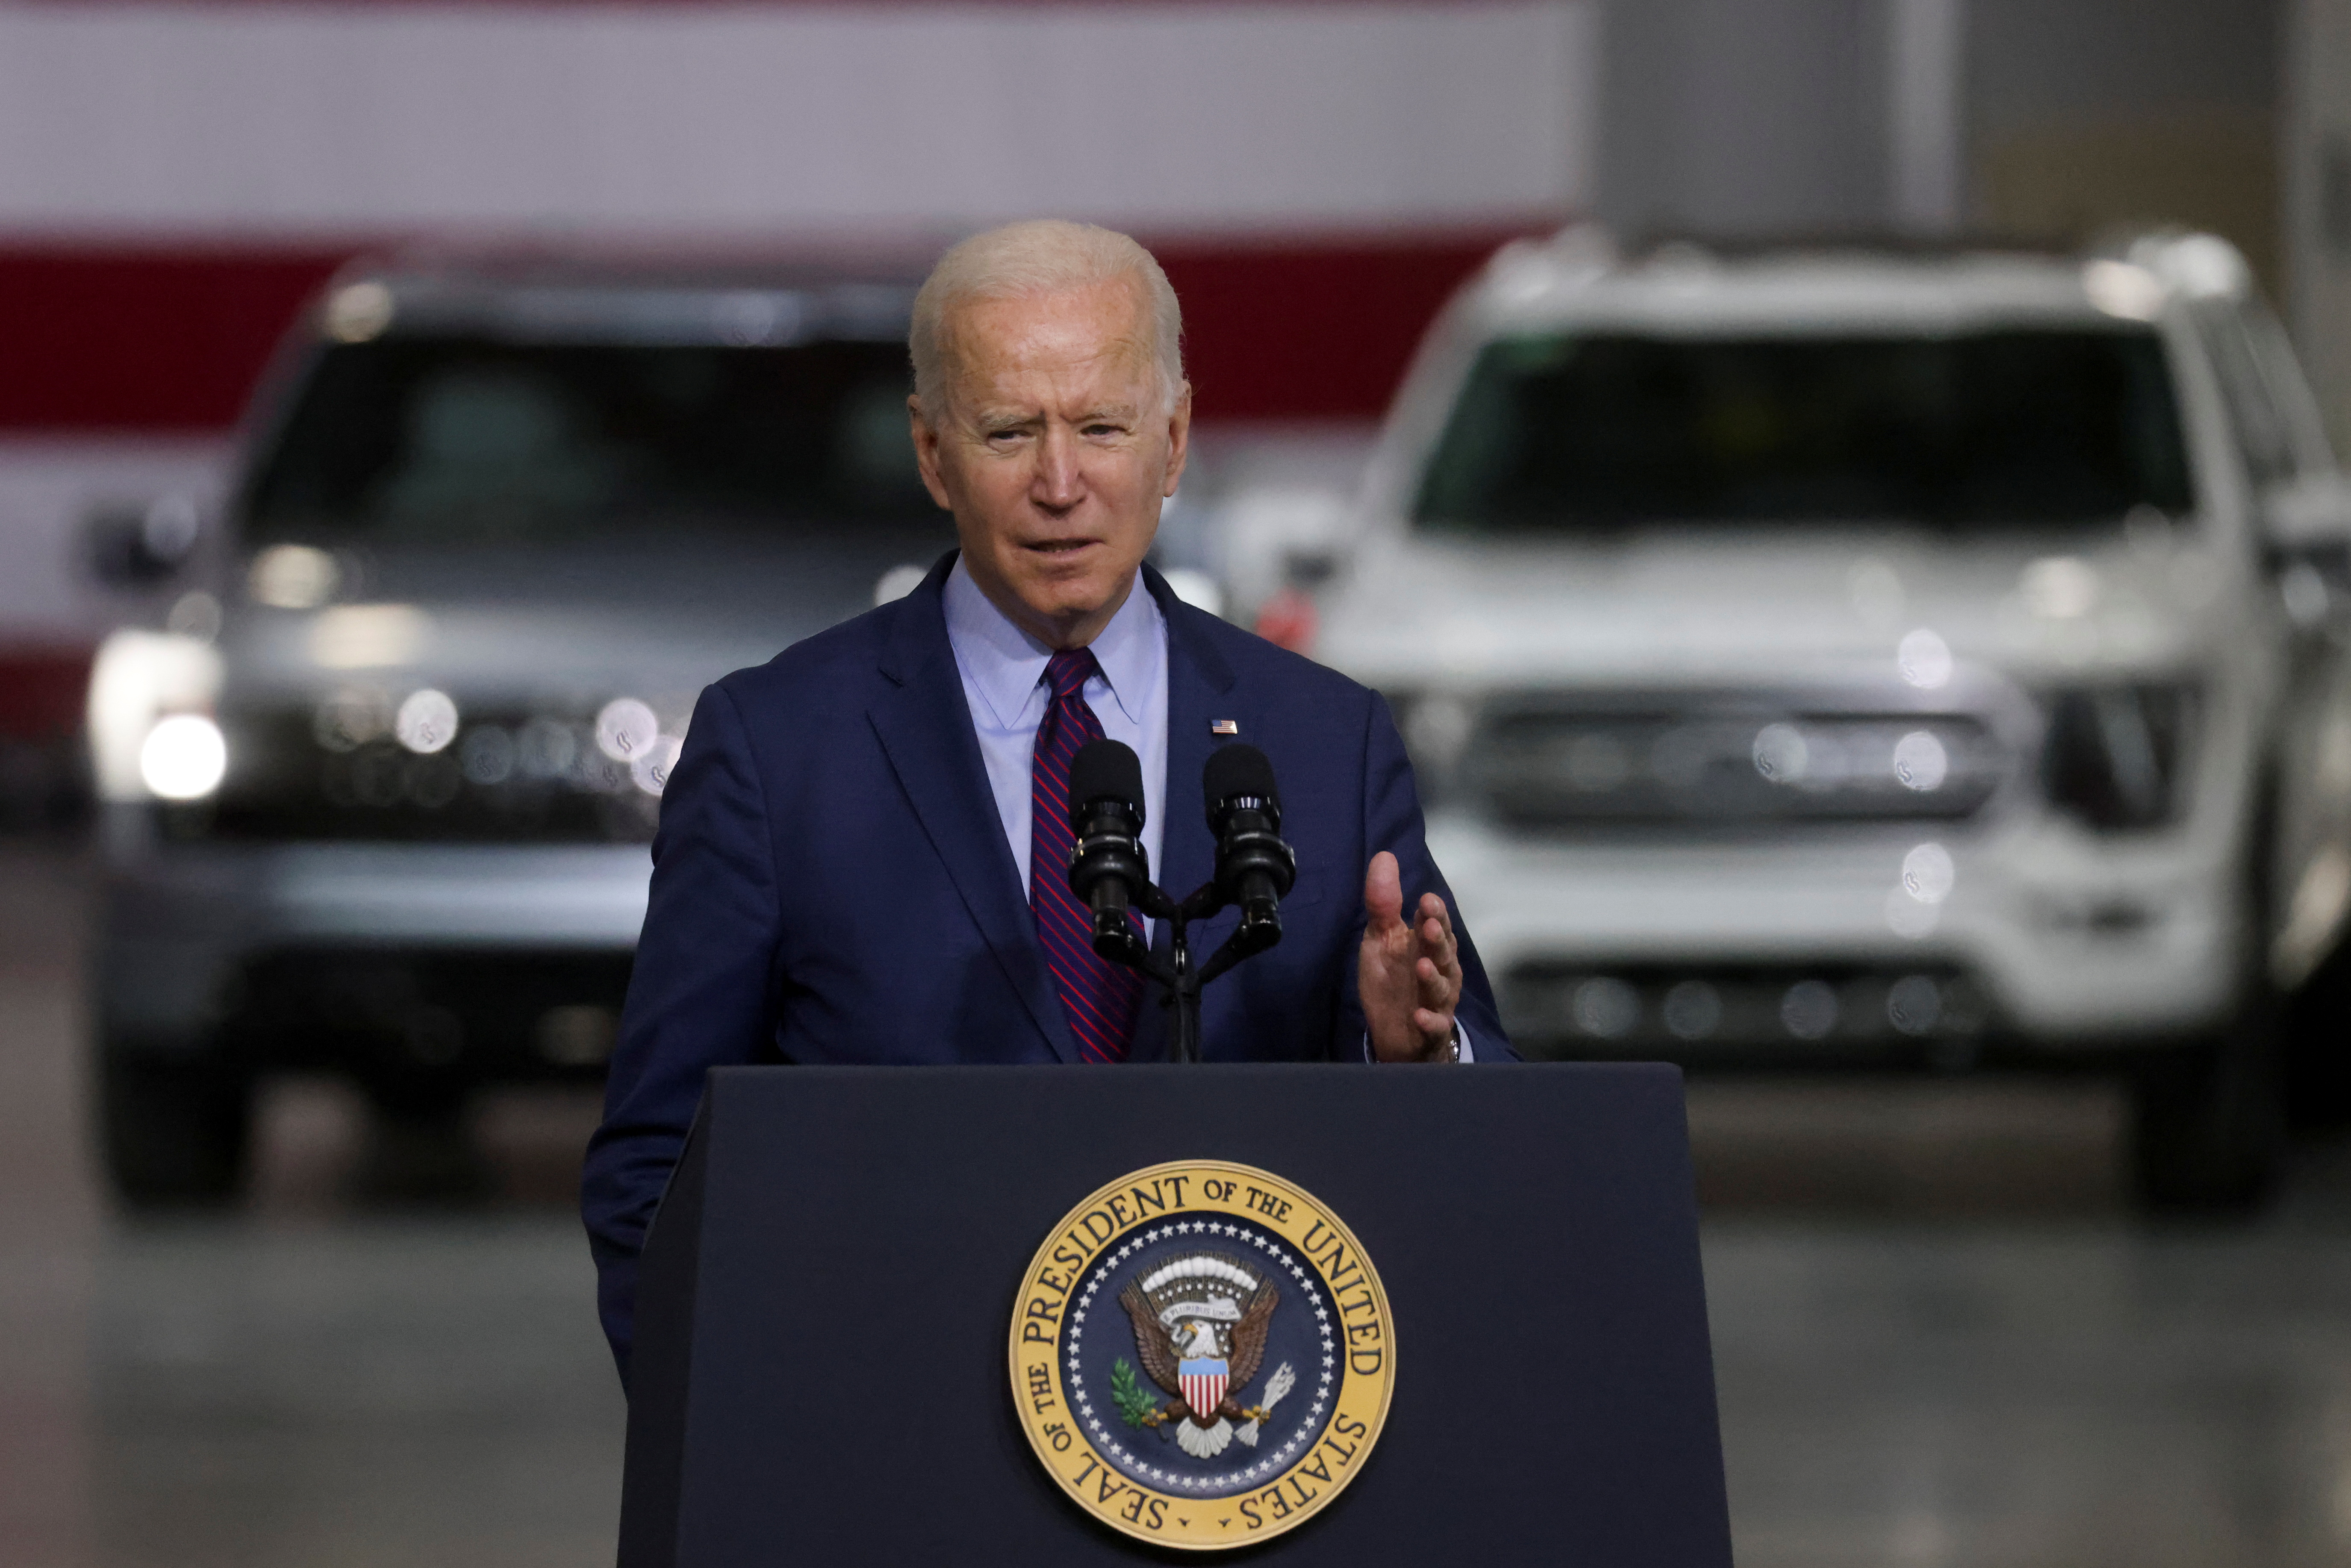 U.S. President Joe Biden delivers remarks after touring Ford Rouge Electric Vehicle Center in Dearborn, Michigan, U.S., May 18, 2021.  REUTERS/Leah Millis